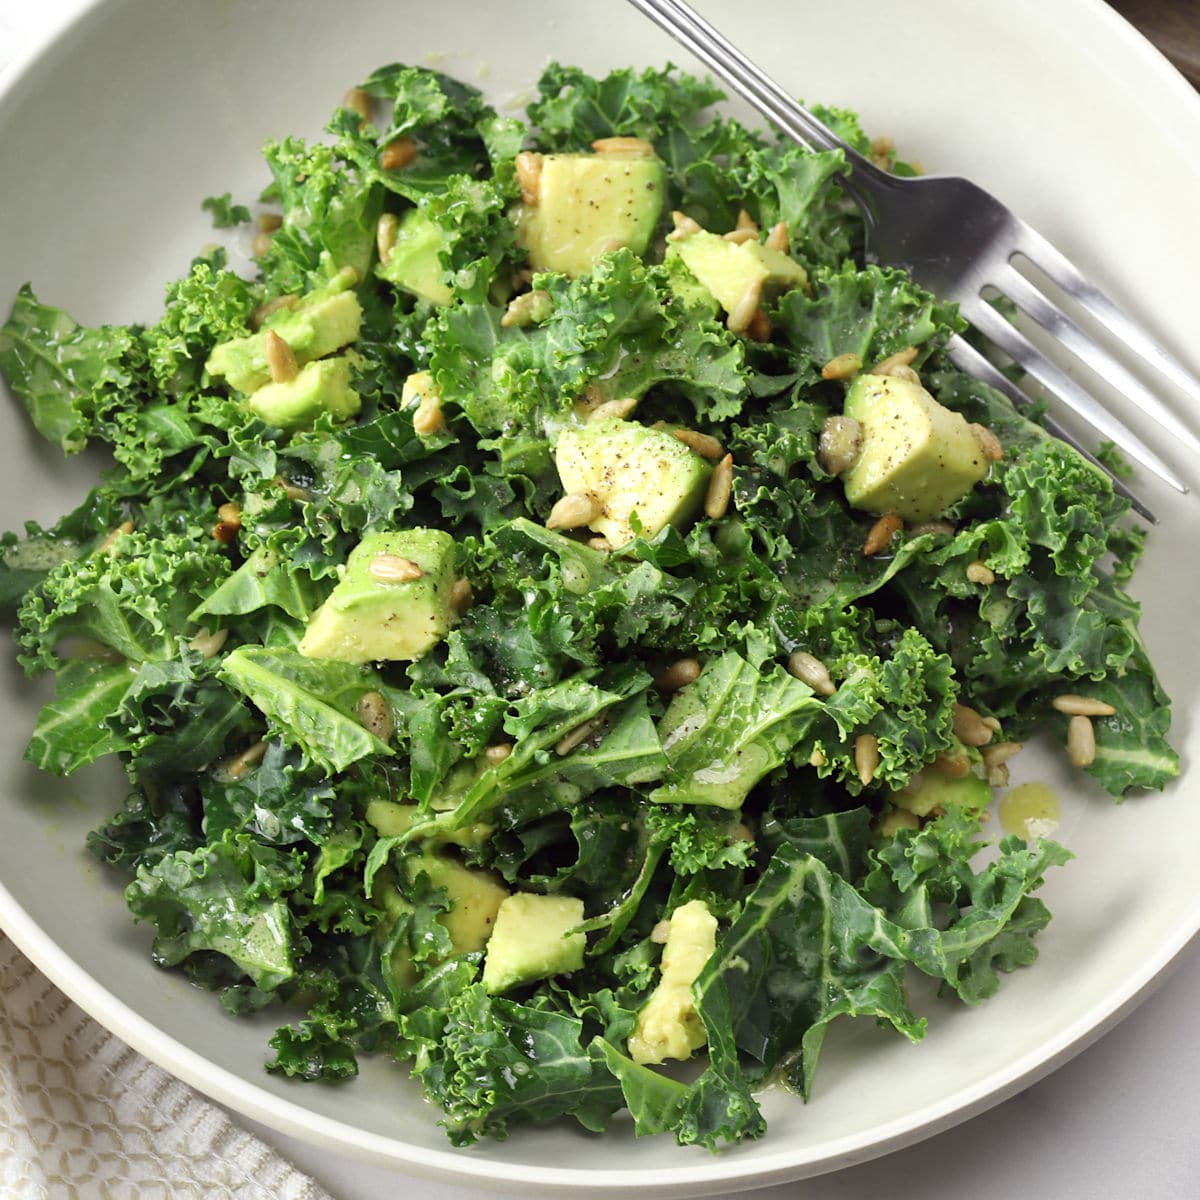 Bowl filled with kale and cubed avocado.